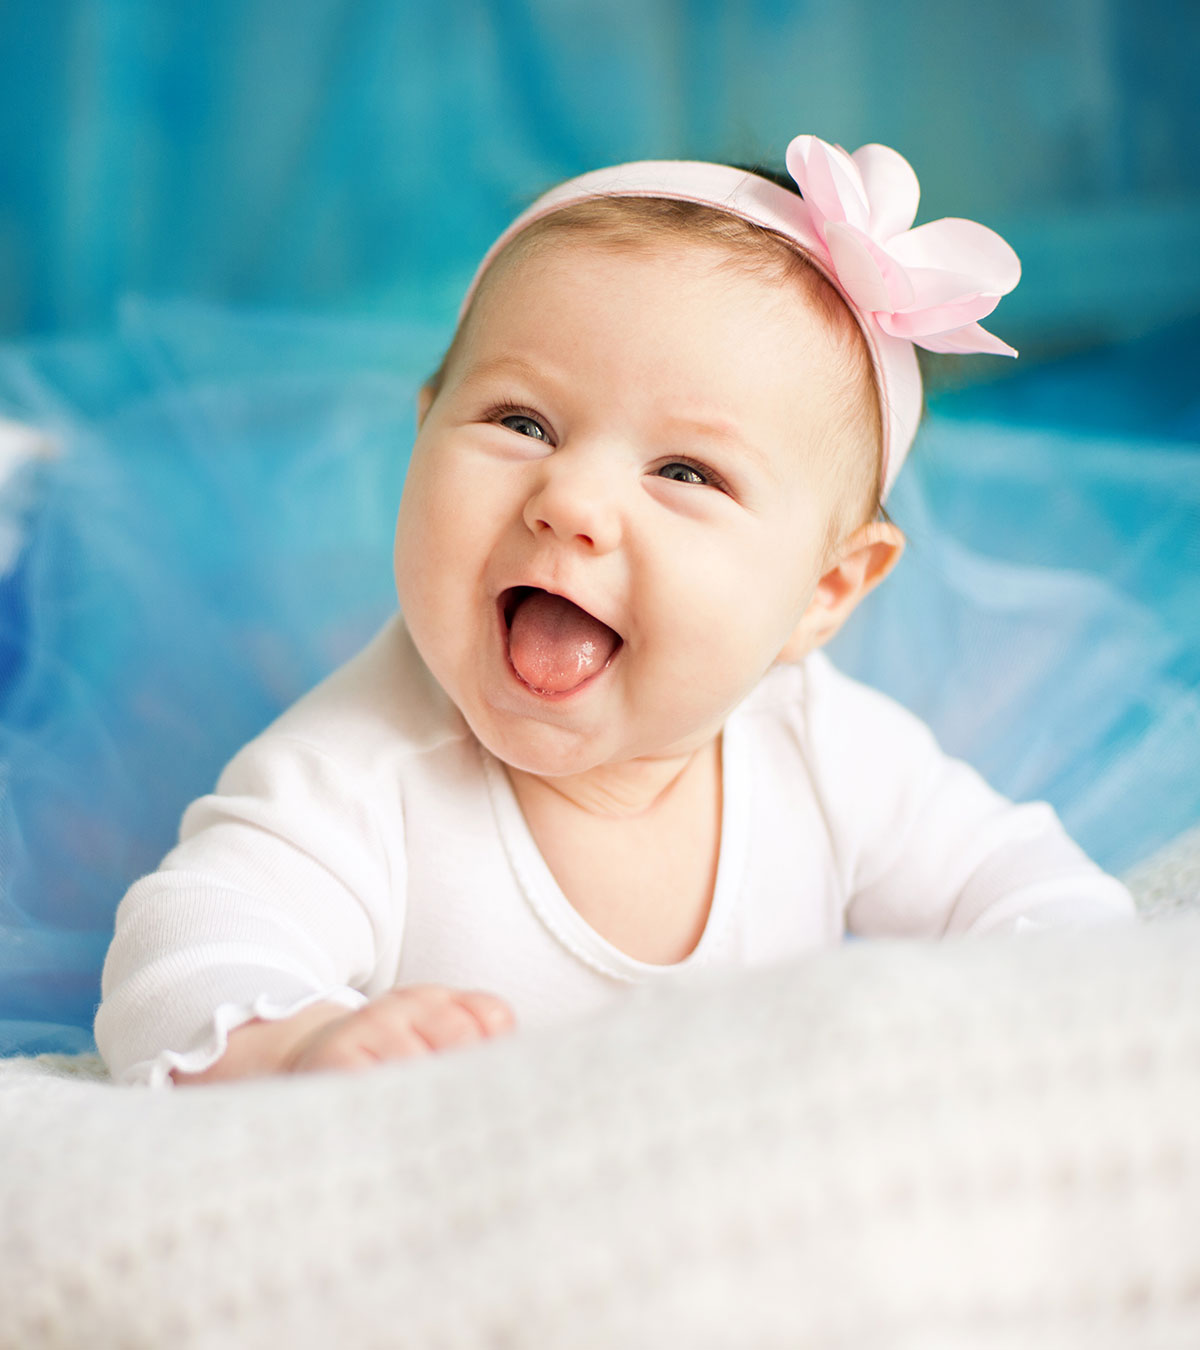 135 Baby Names Meaning Happy And Joy